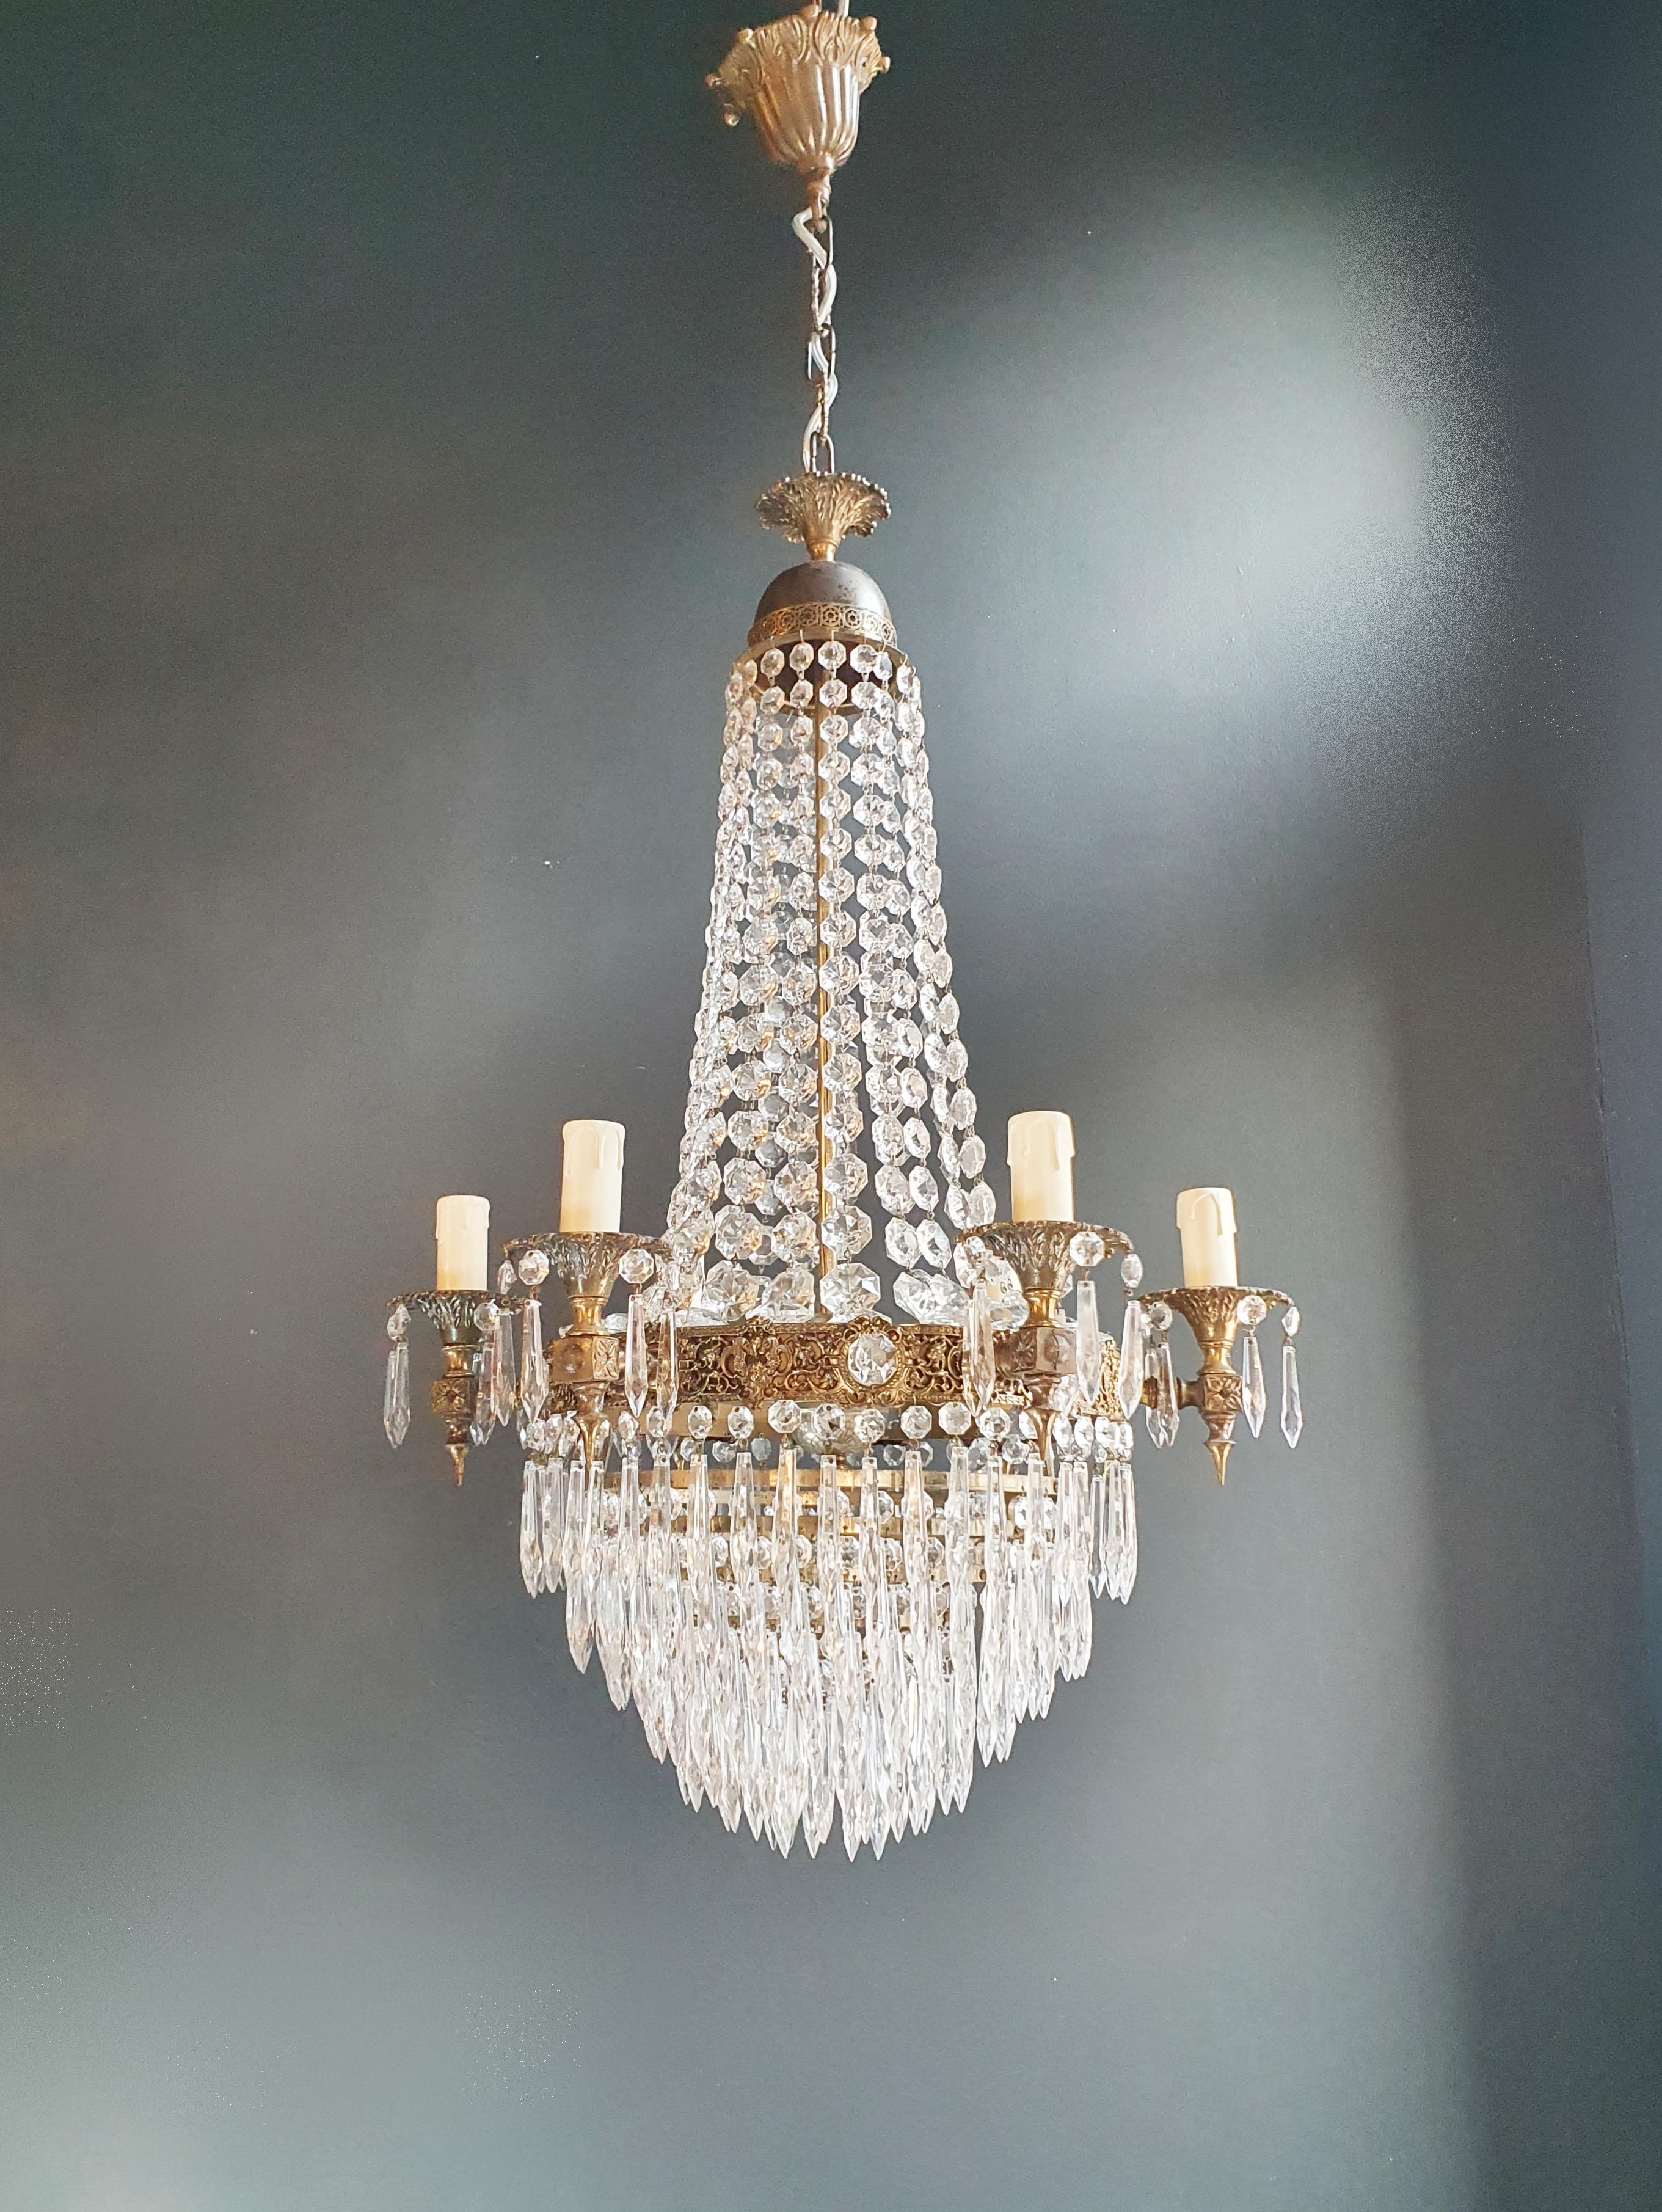 Empire Brass Sac a Pearl Chandelier Crystal Lustre Ceiling Antique 4